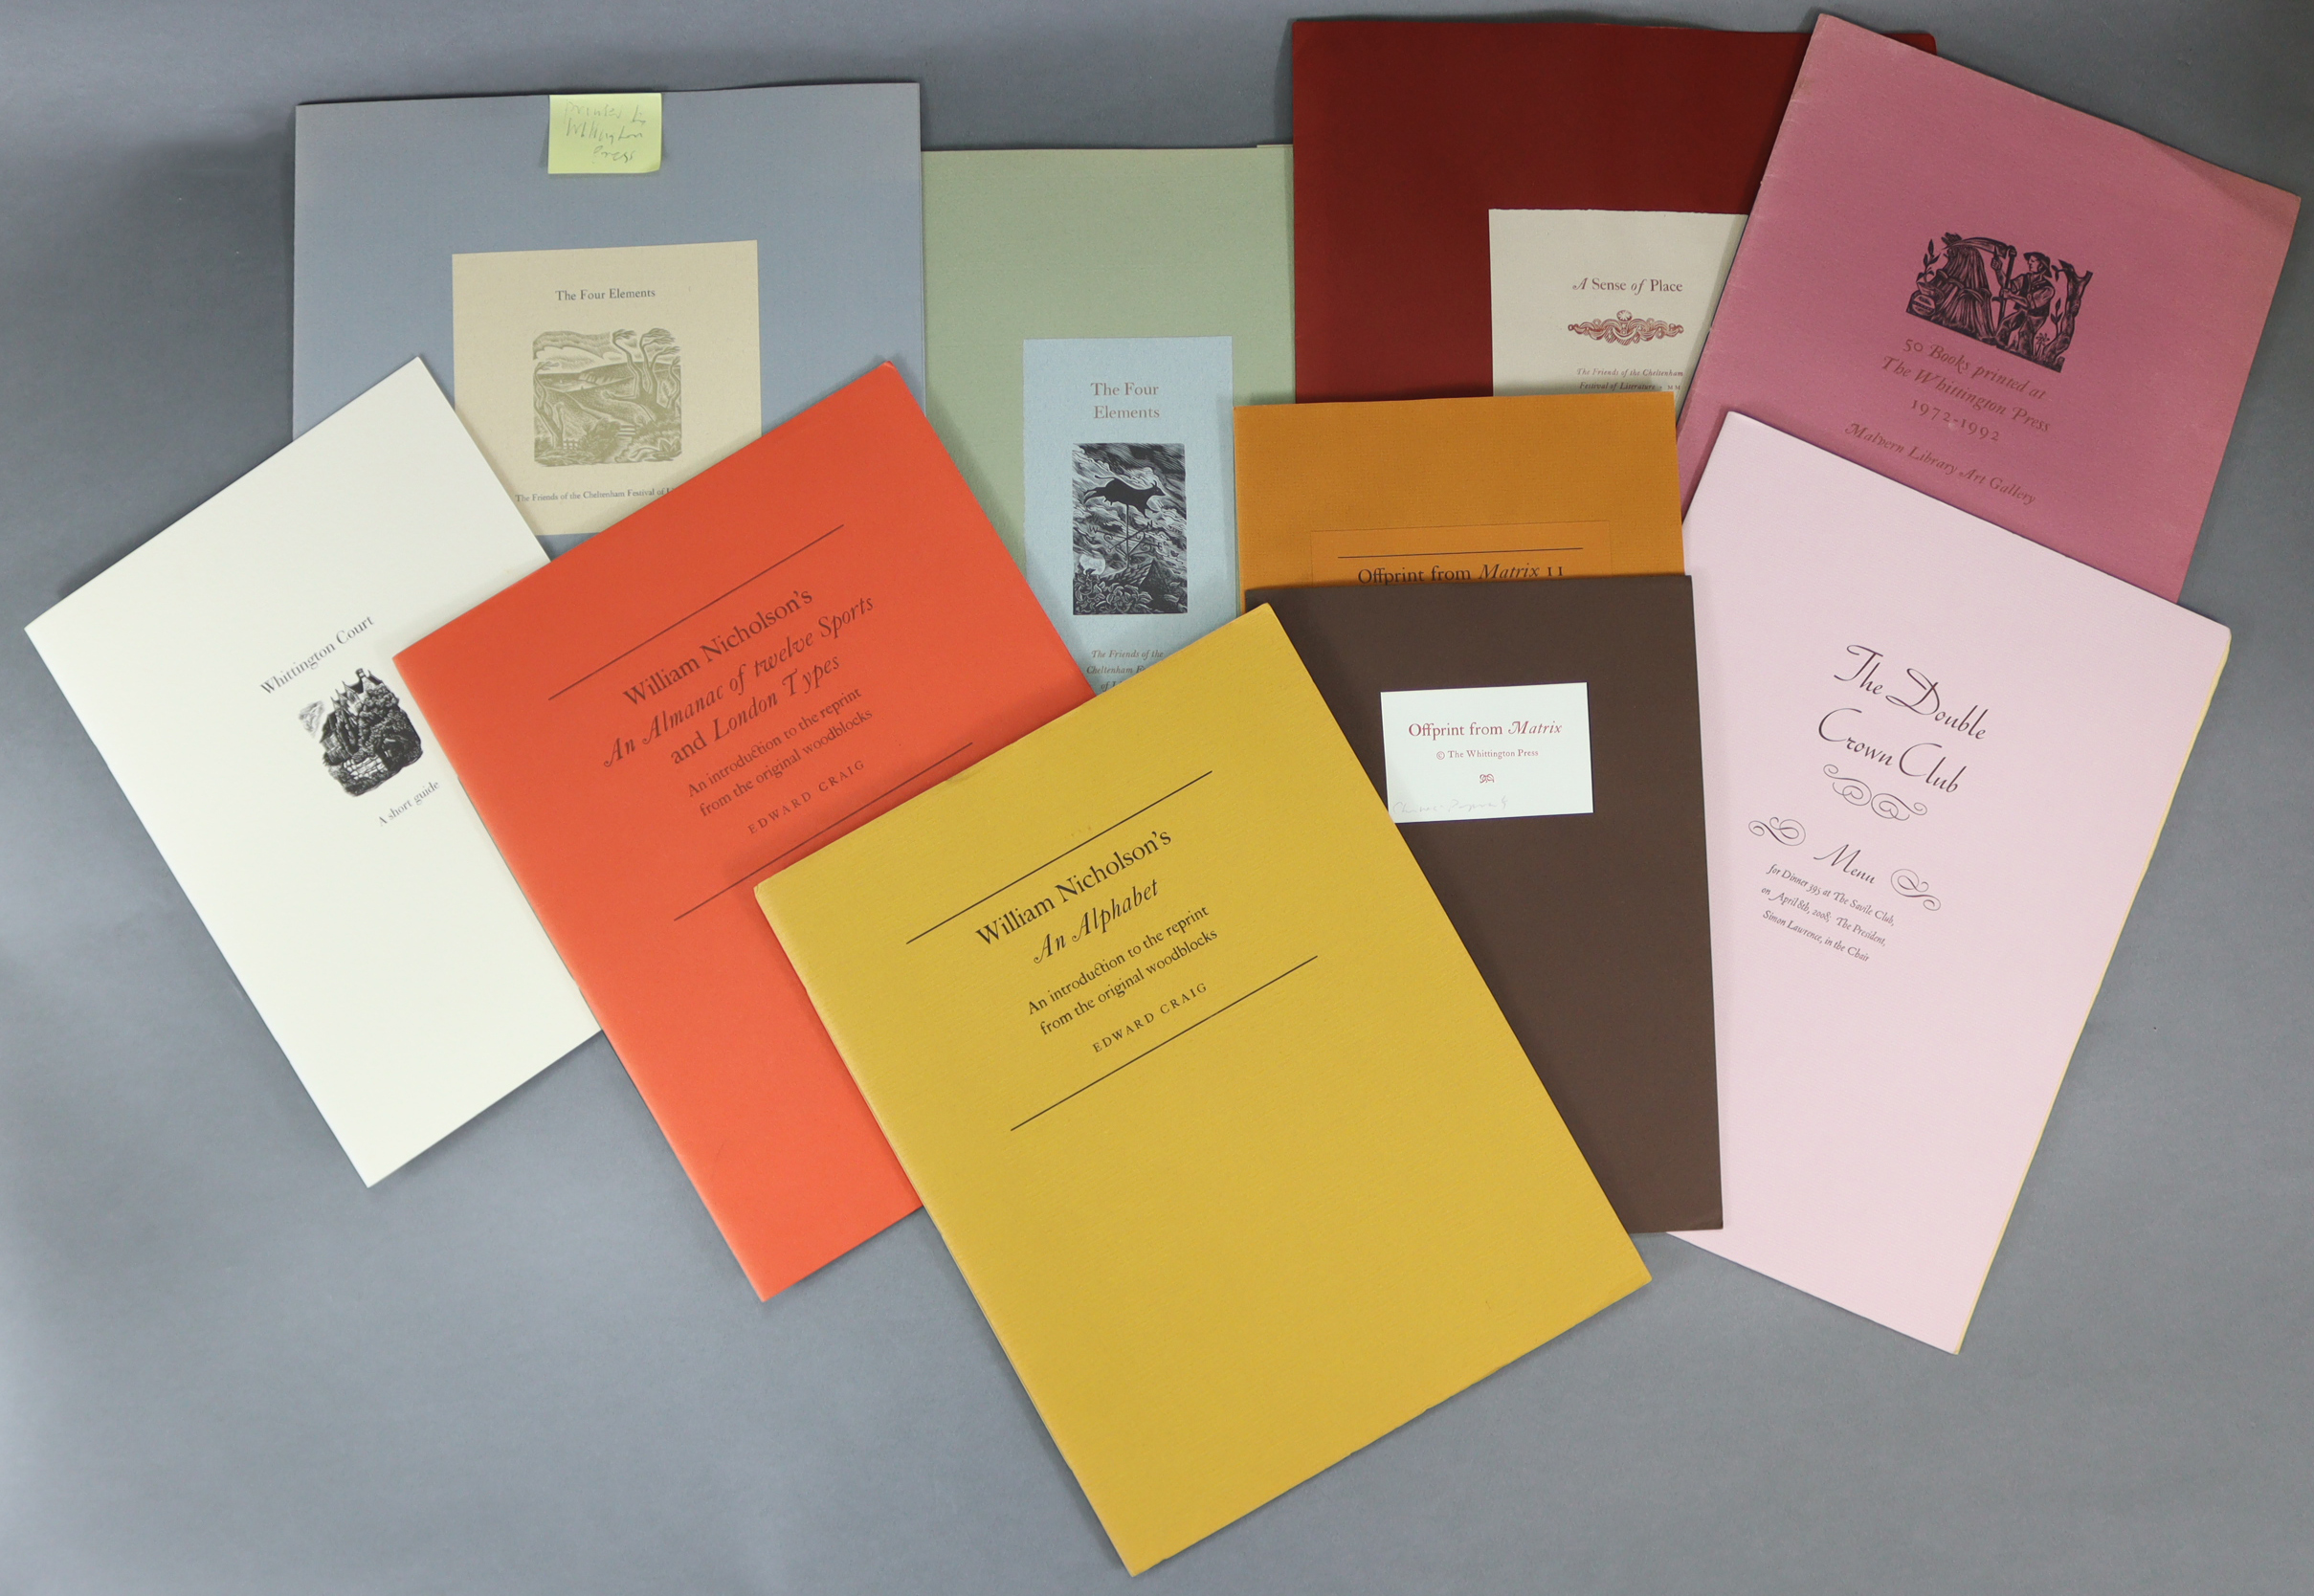 WHITTINGTON PRESS: HEANEY, Seamus (and others); “The Four Elements”, 1991, a folder produced for the - Image 2 of 4